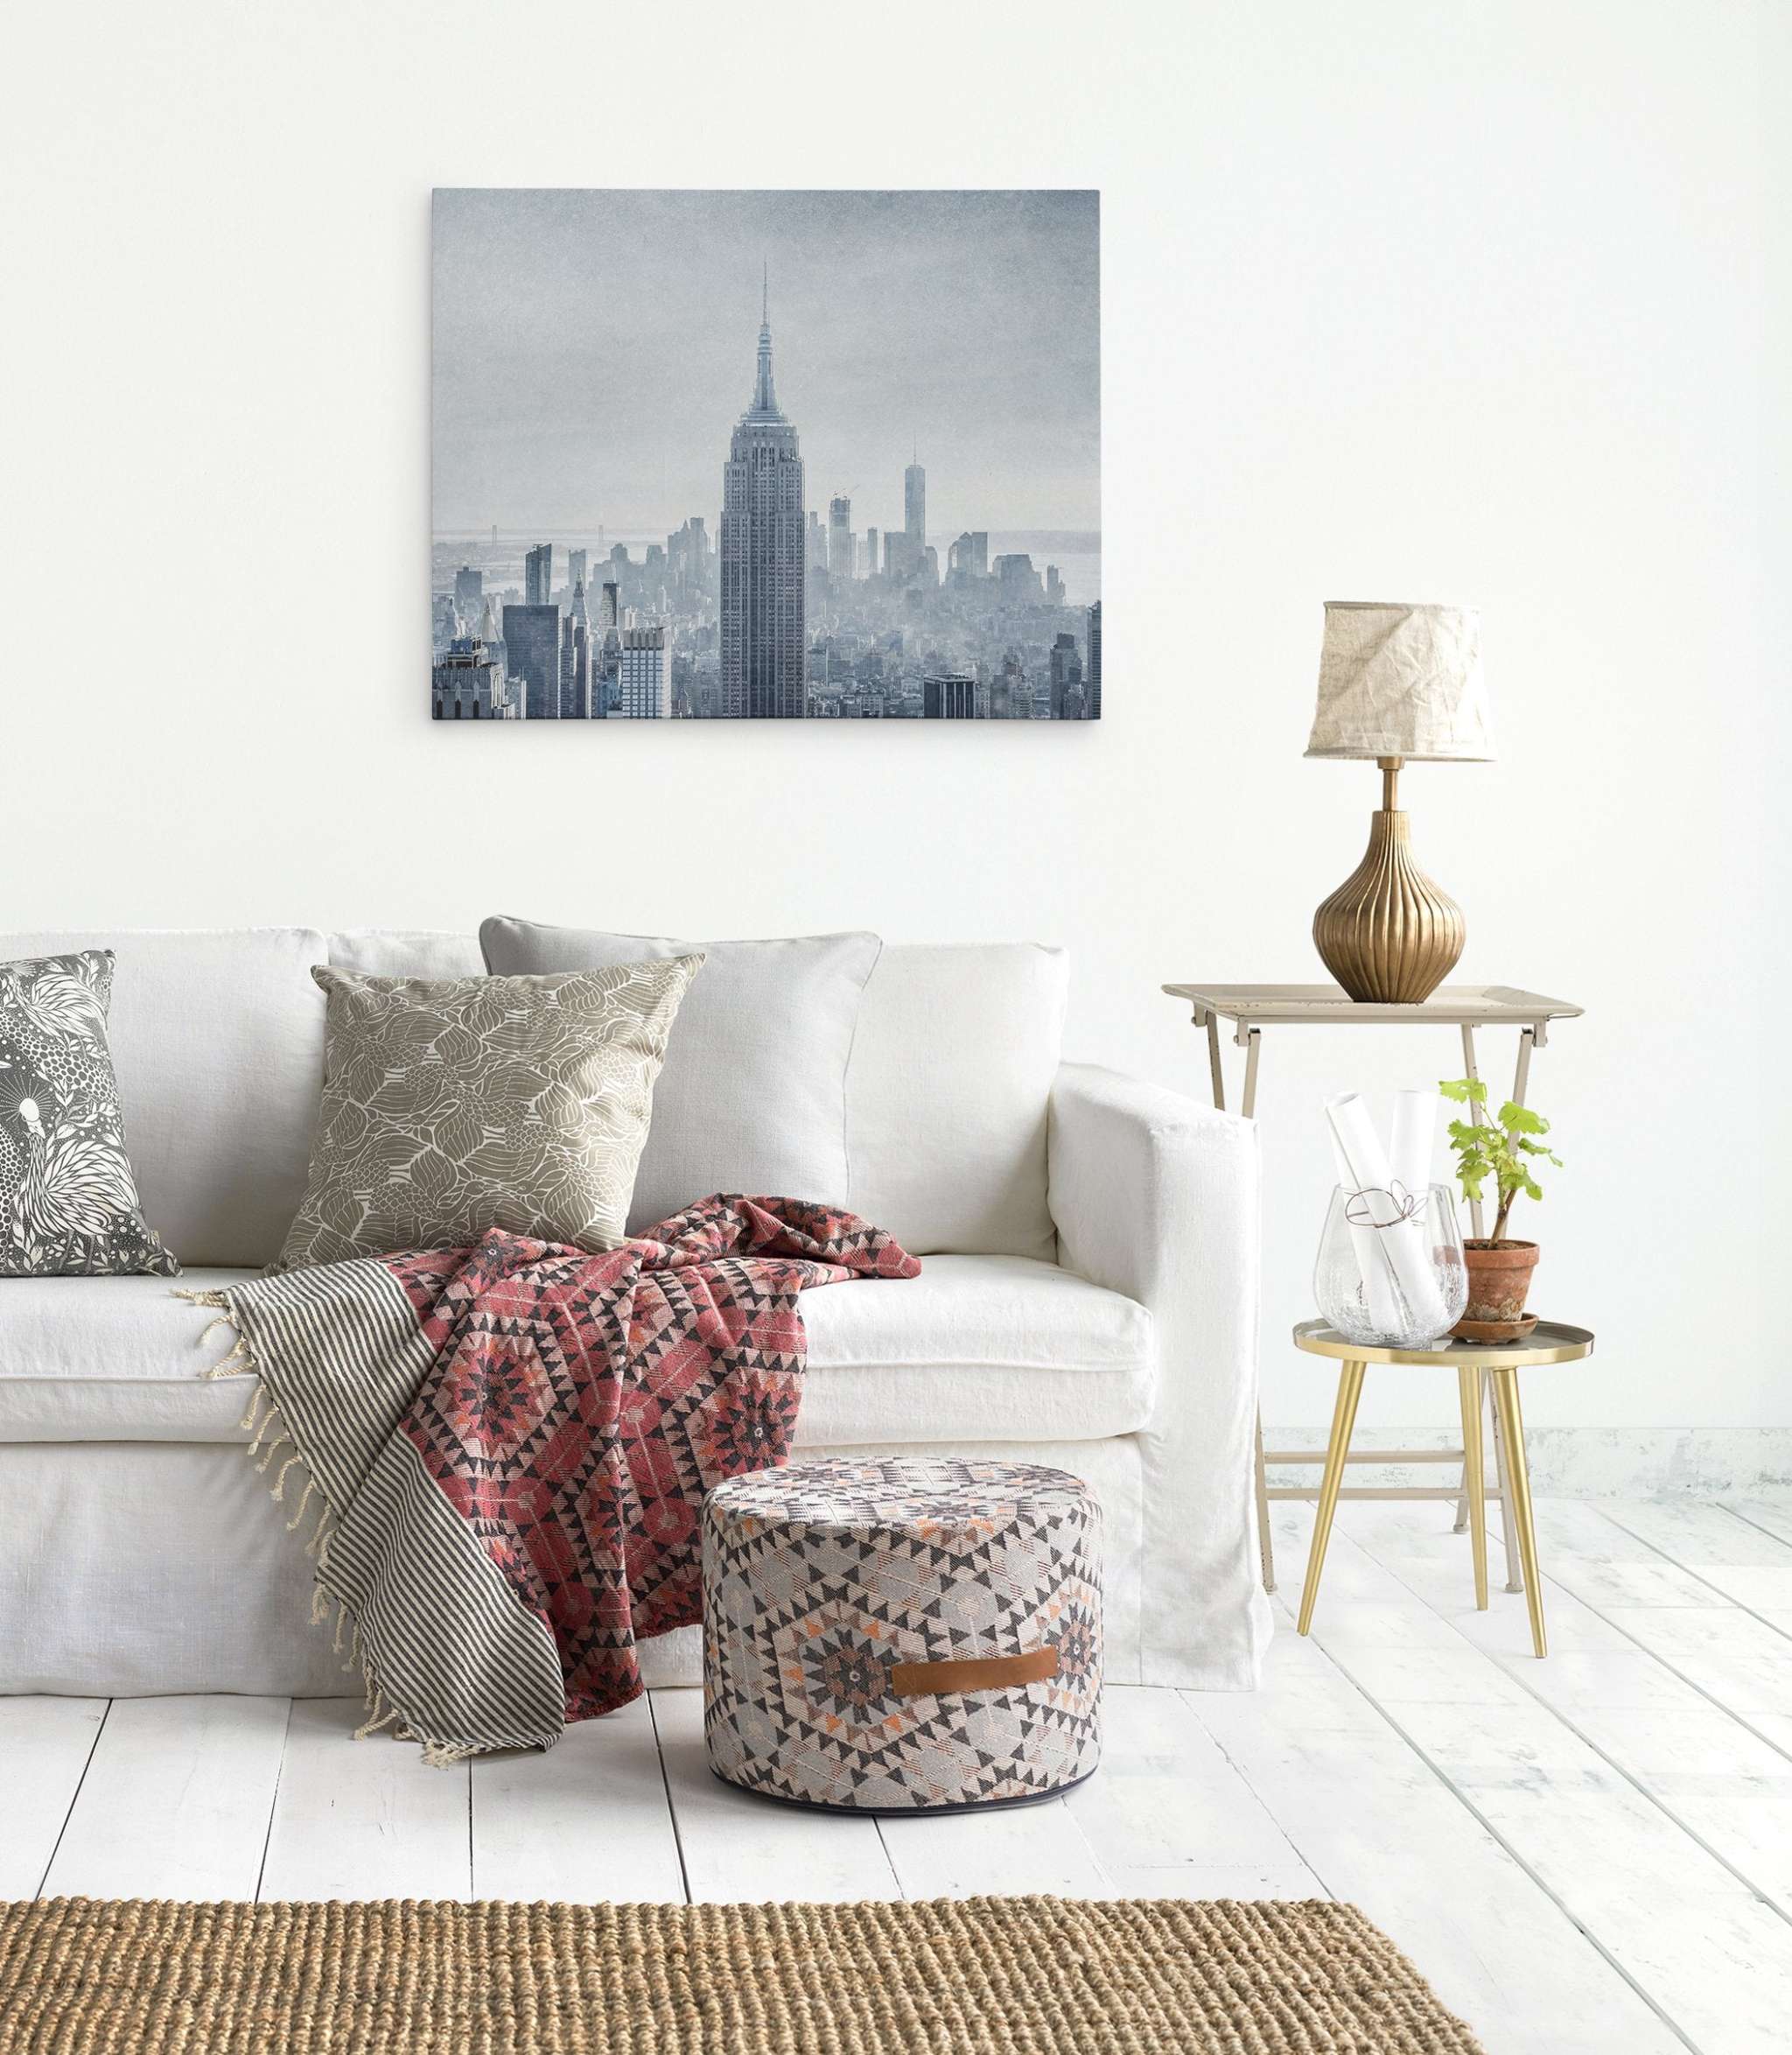 A cozy living room with a white sofa adorned with patterned cushions and a red-patterned throw blanket made of premium poly-cotton blend. A round patterned ottoman sits nearby. A small side table with a lamp, plant, and books is on the right, and an Offley Green New York City Canvas Wall Art titled 'Winter Metropolis' hangs on the white wall behind the sofa.